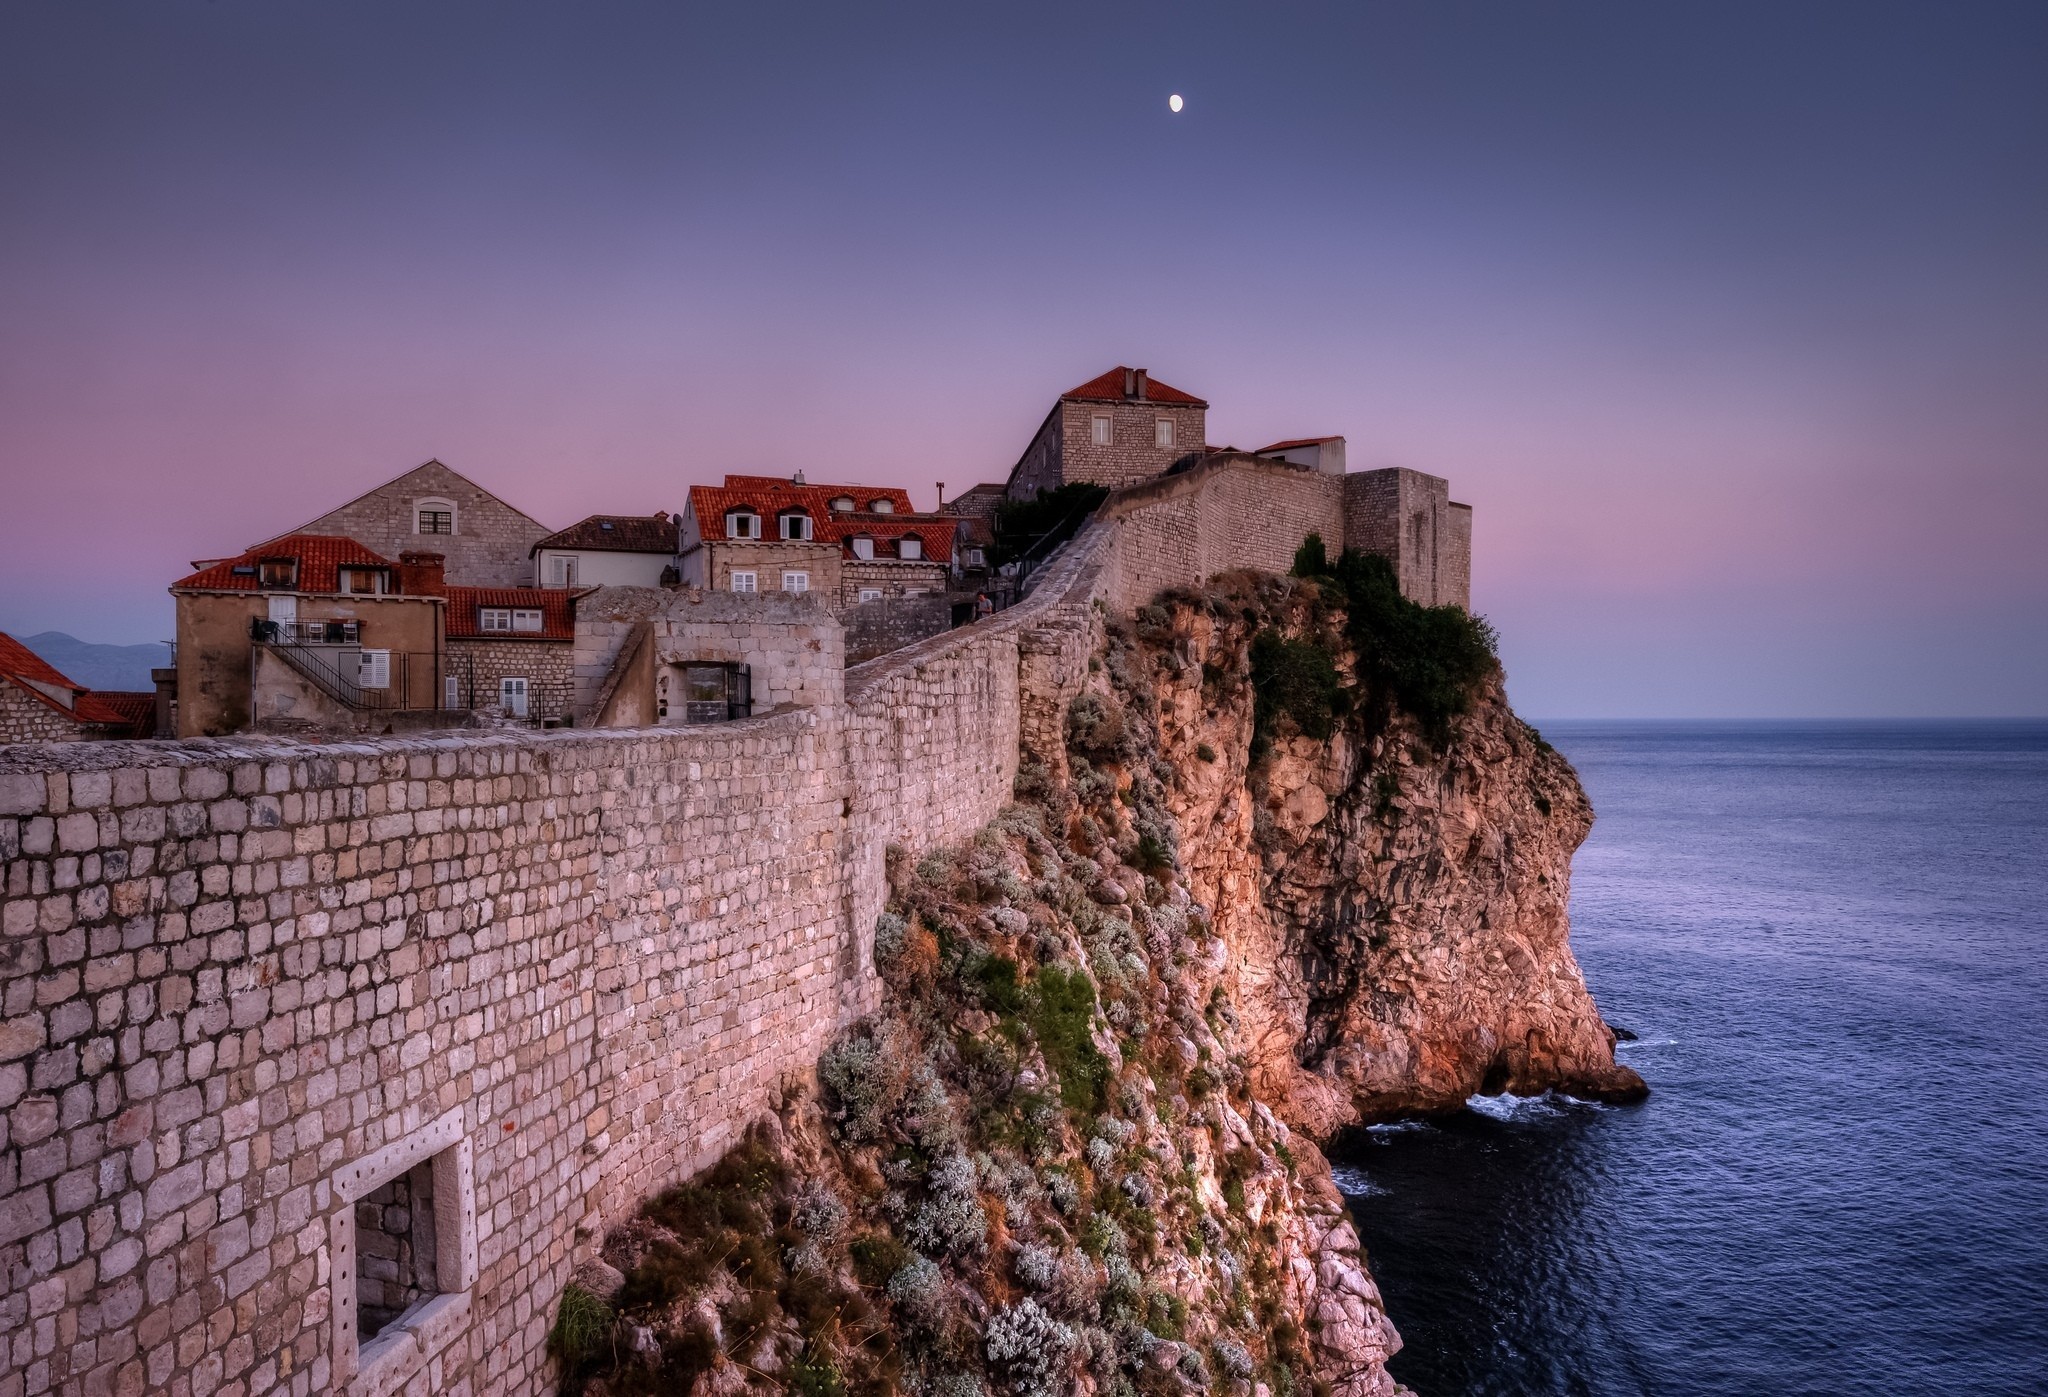 architecture, House, Town, Old, Old building, Dubrovnik, Evening, Croatia, Stone house, Walls, Sea, Moon, Horizon, Rock, Stones Wallpaper